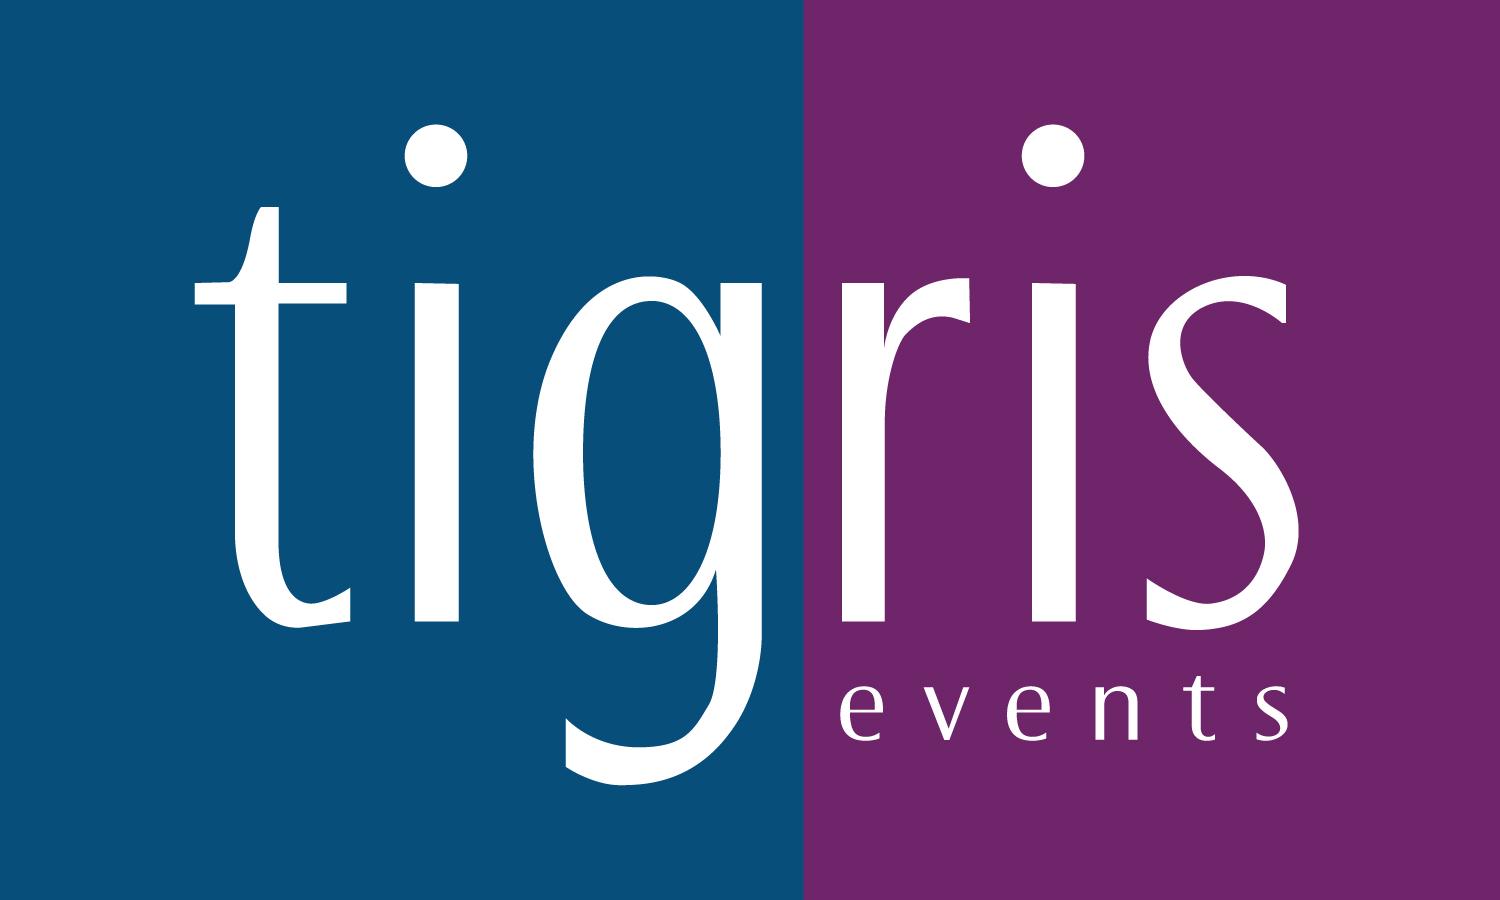 Tigris Events Inc. profile on Qualified.One